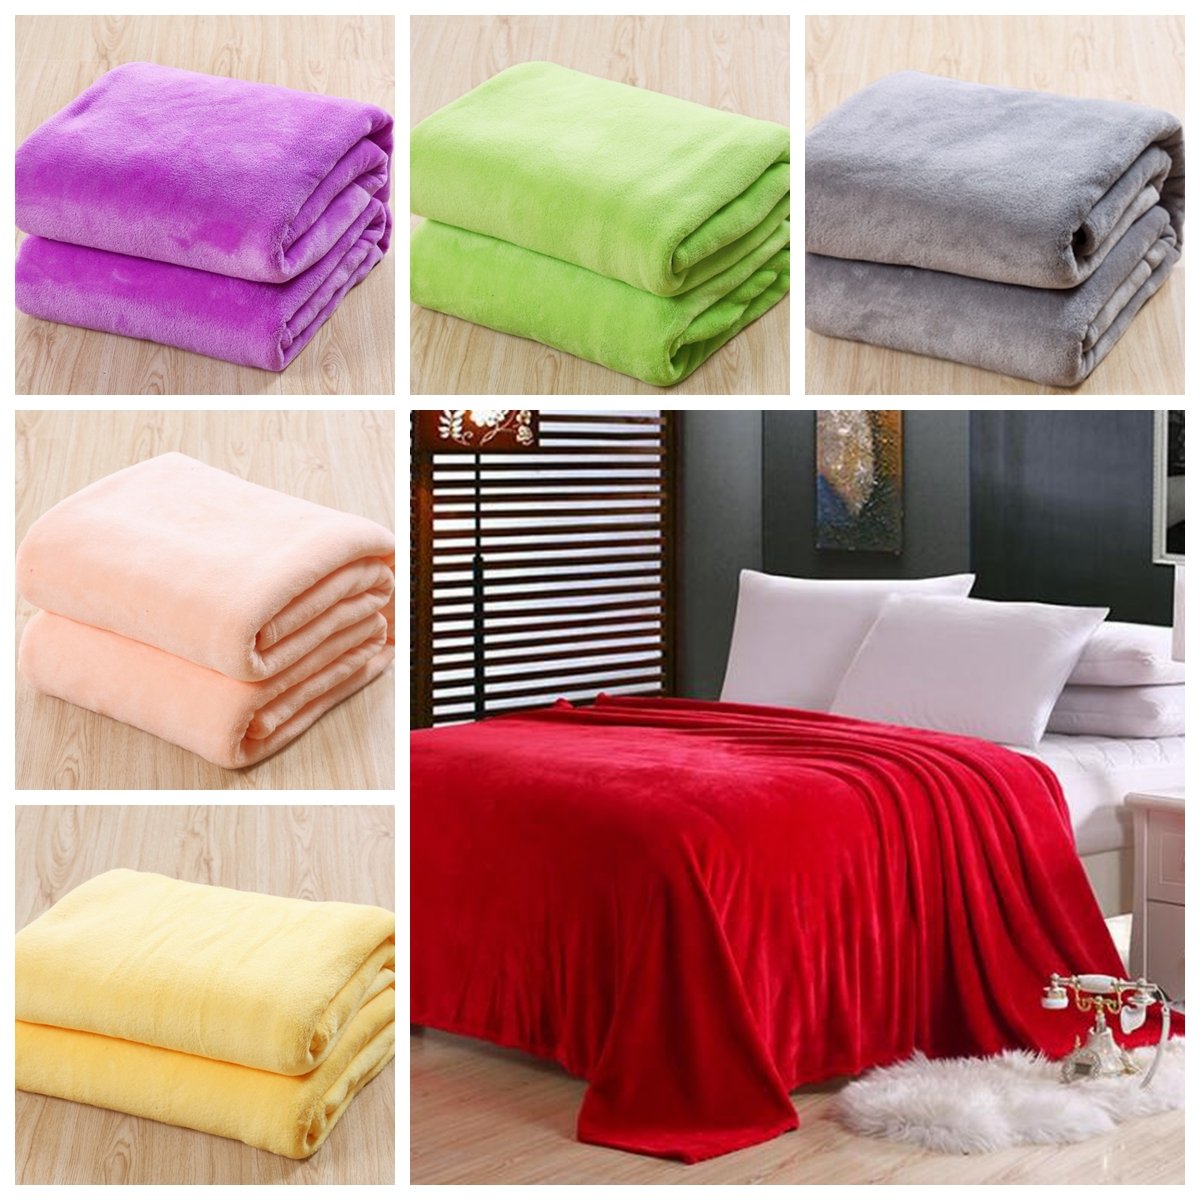 

6 Colors 150x200cm Flannel Warm Luxury Coral Blanket Sofa Bed Bedding Warm Soft Quilt, Purple pink green yellow red grey